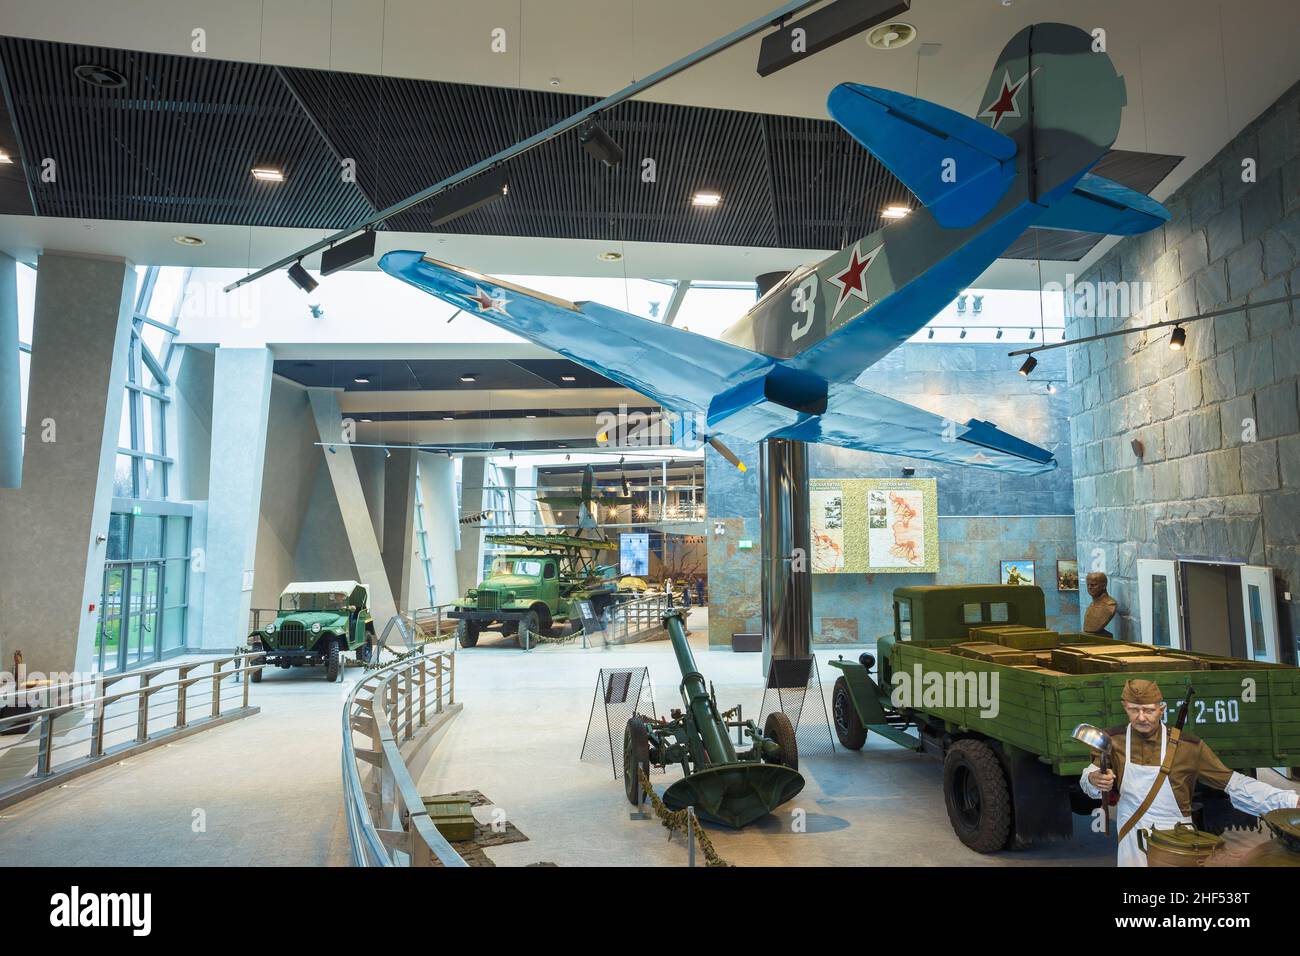 Soviet russian Yakovlev Yak-9 fighter aircraft and ZIS-5 Soviet truck In The Belarusian Museum Of The Great Patriotic War Stock Photo